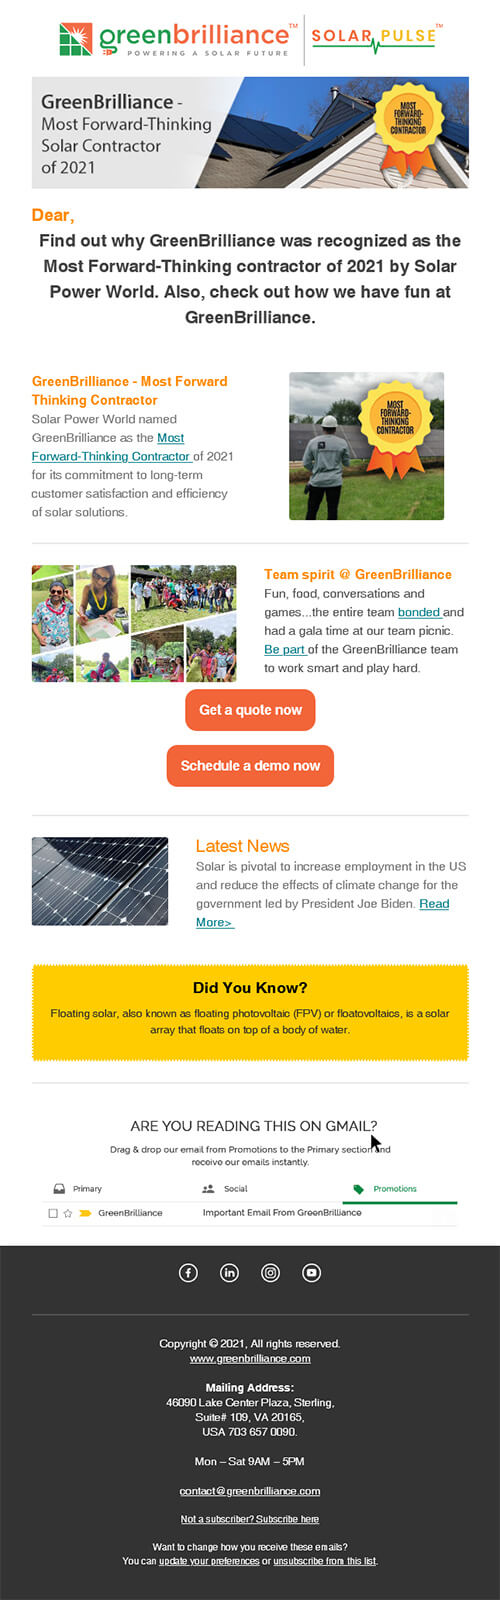 GreenBrilliance – Most Forward-Thinking Solar Contractor of 2021